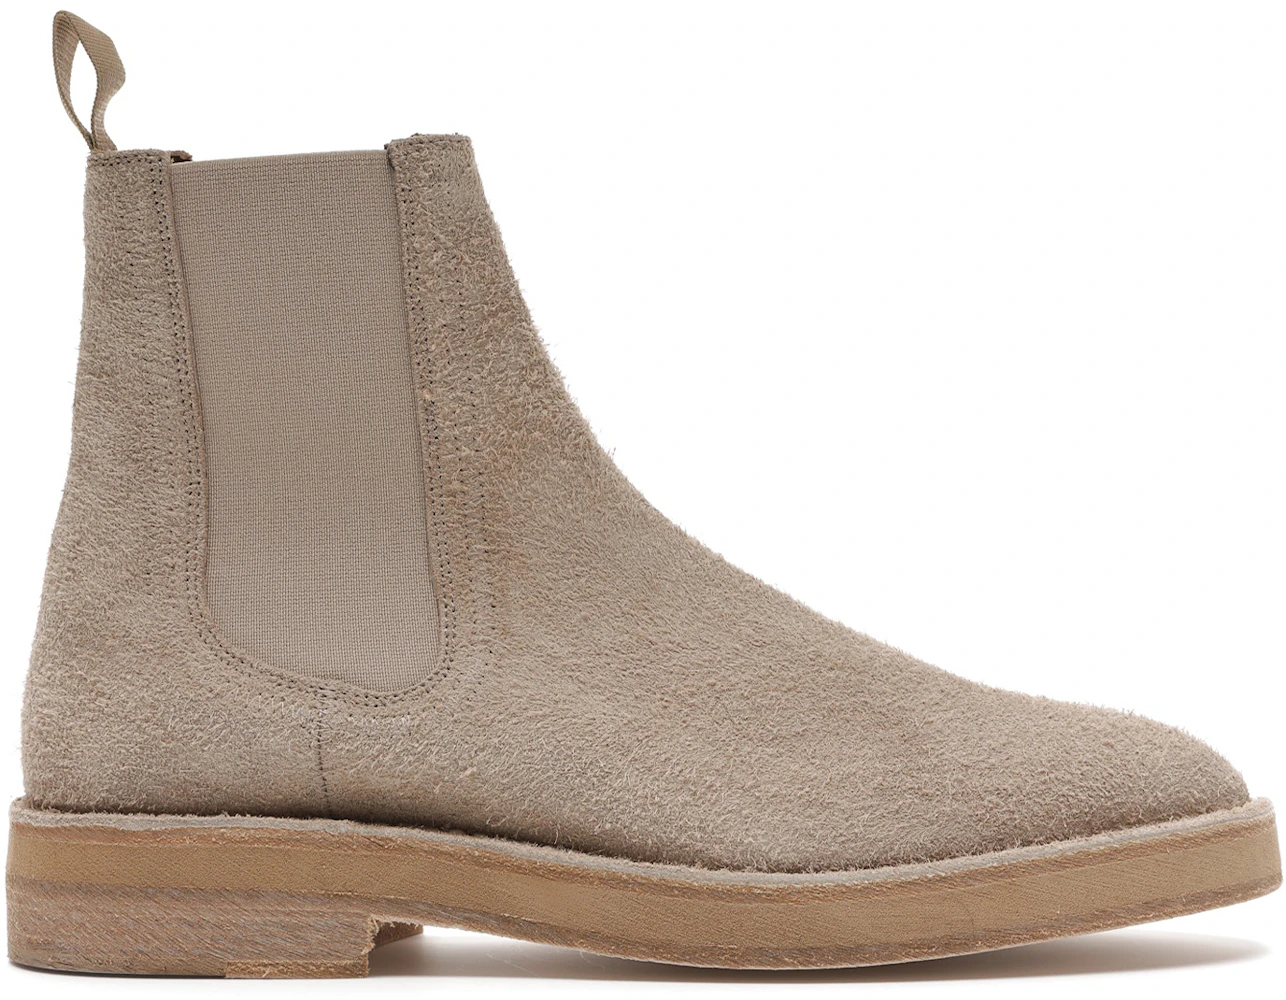 Yeezy Chelsea Boot Thick Shaggy Taupe - KM5005.038 - US